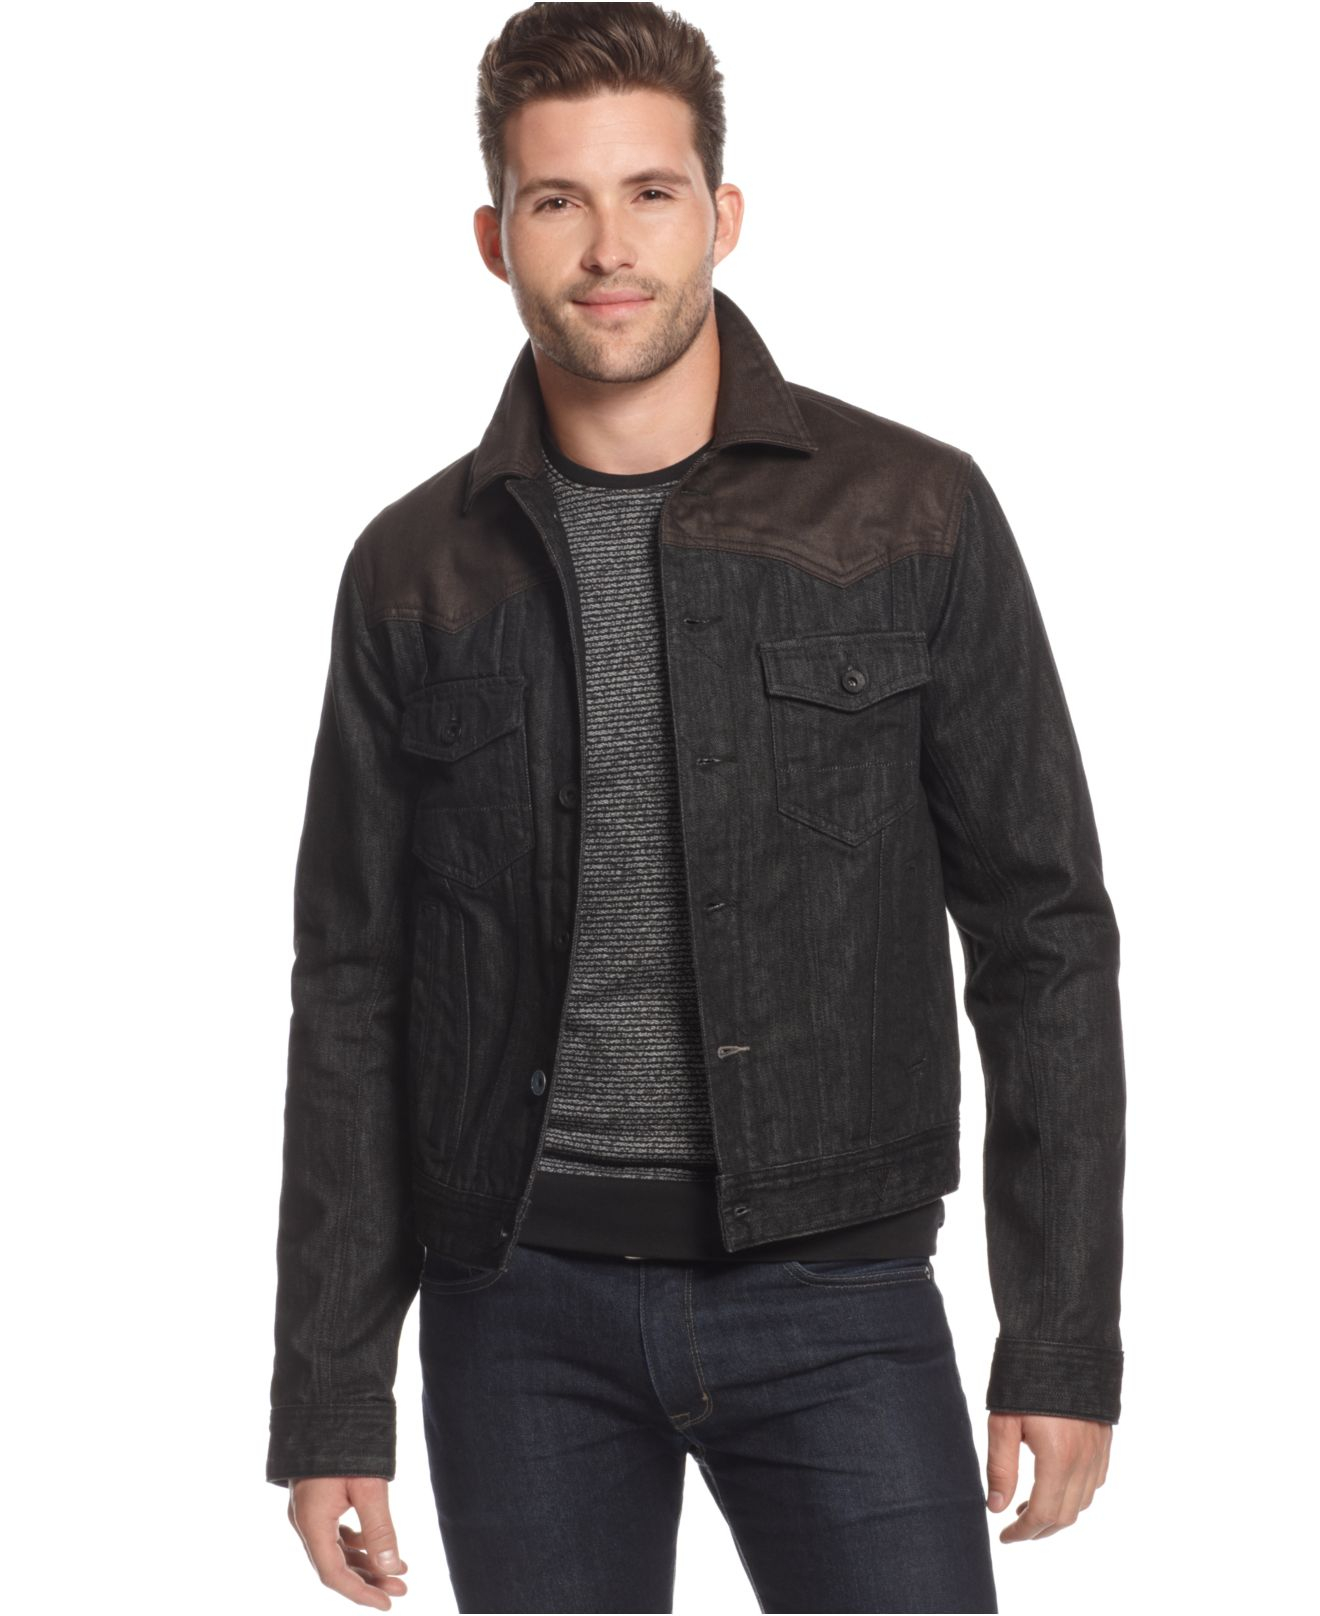 Guess Dillon Hitchhiker-Wash Jacket in Brown for Men - Lyst